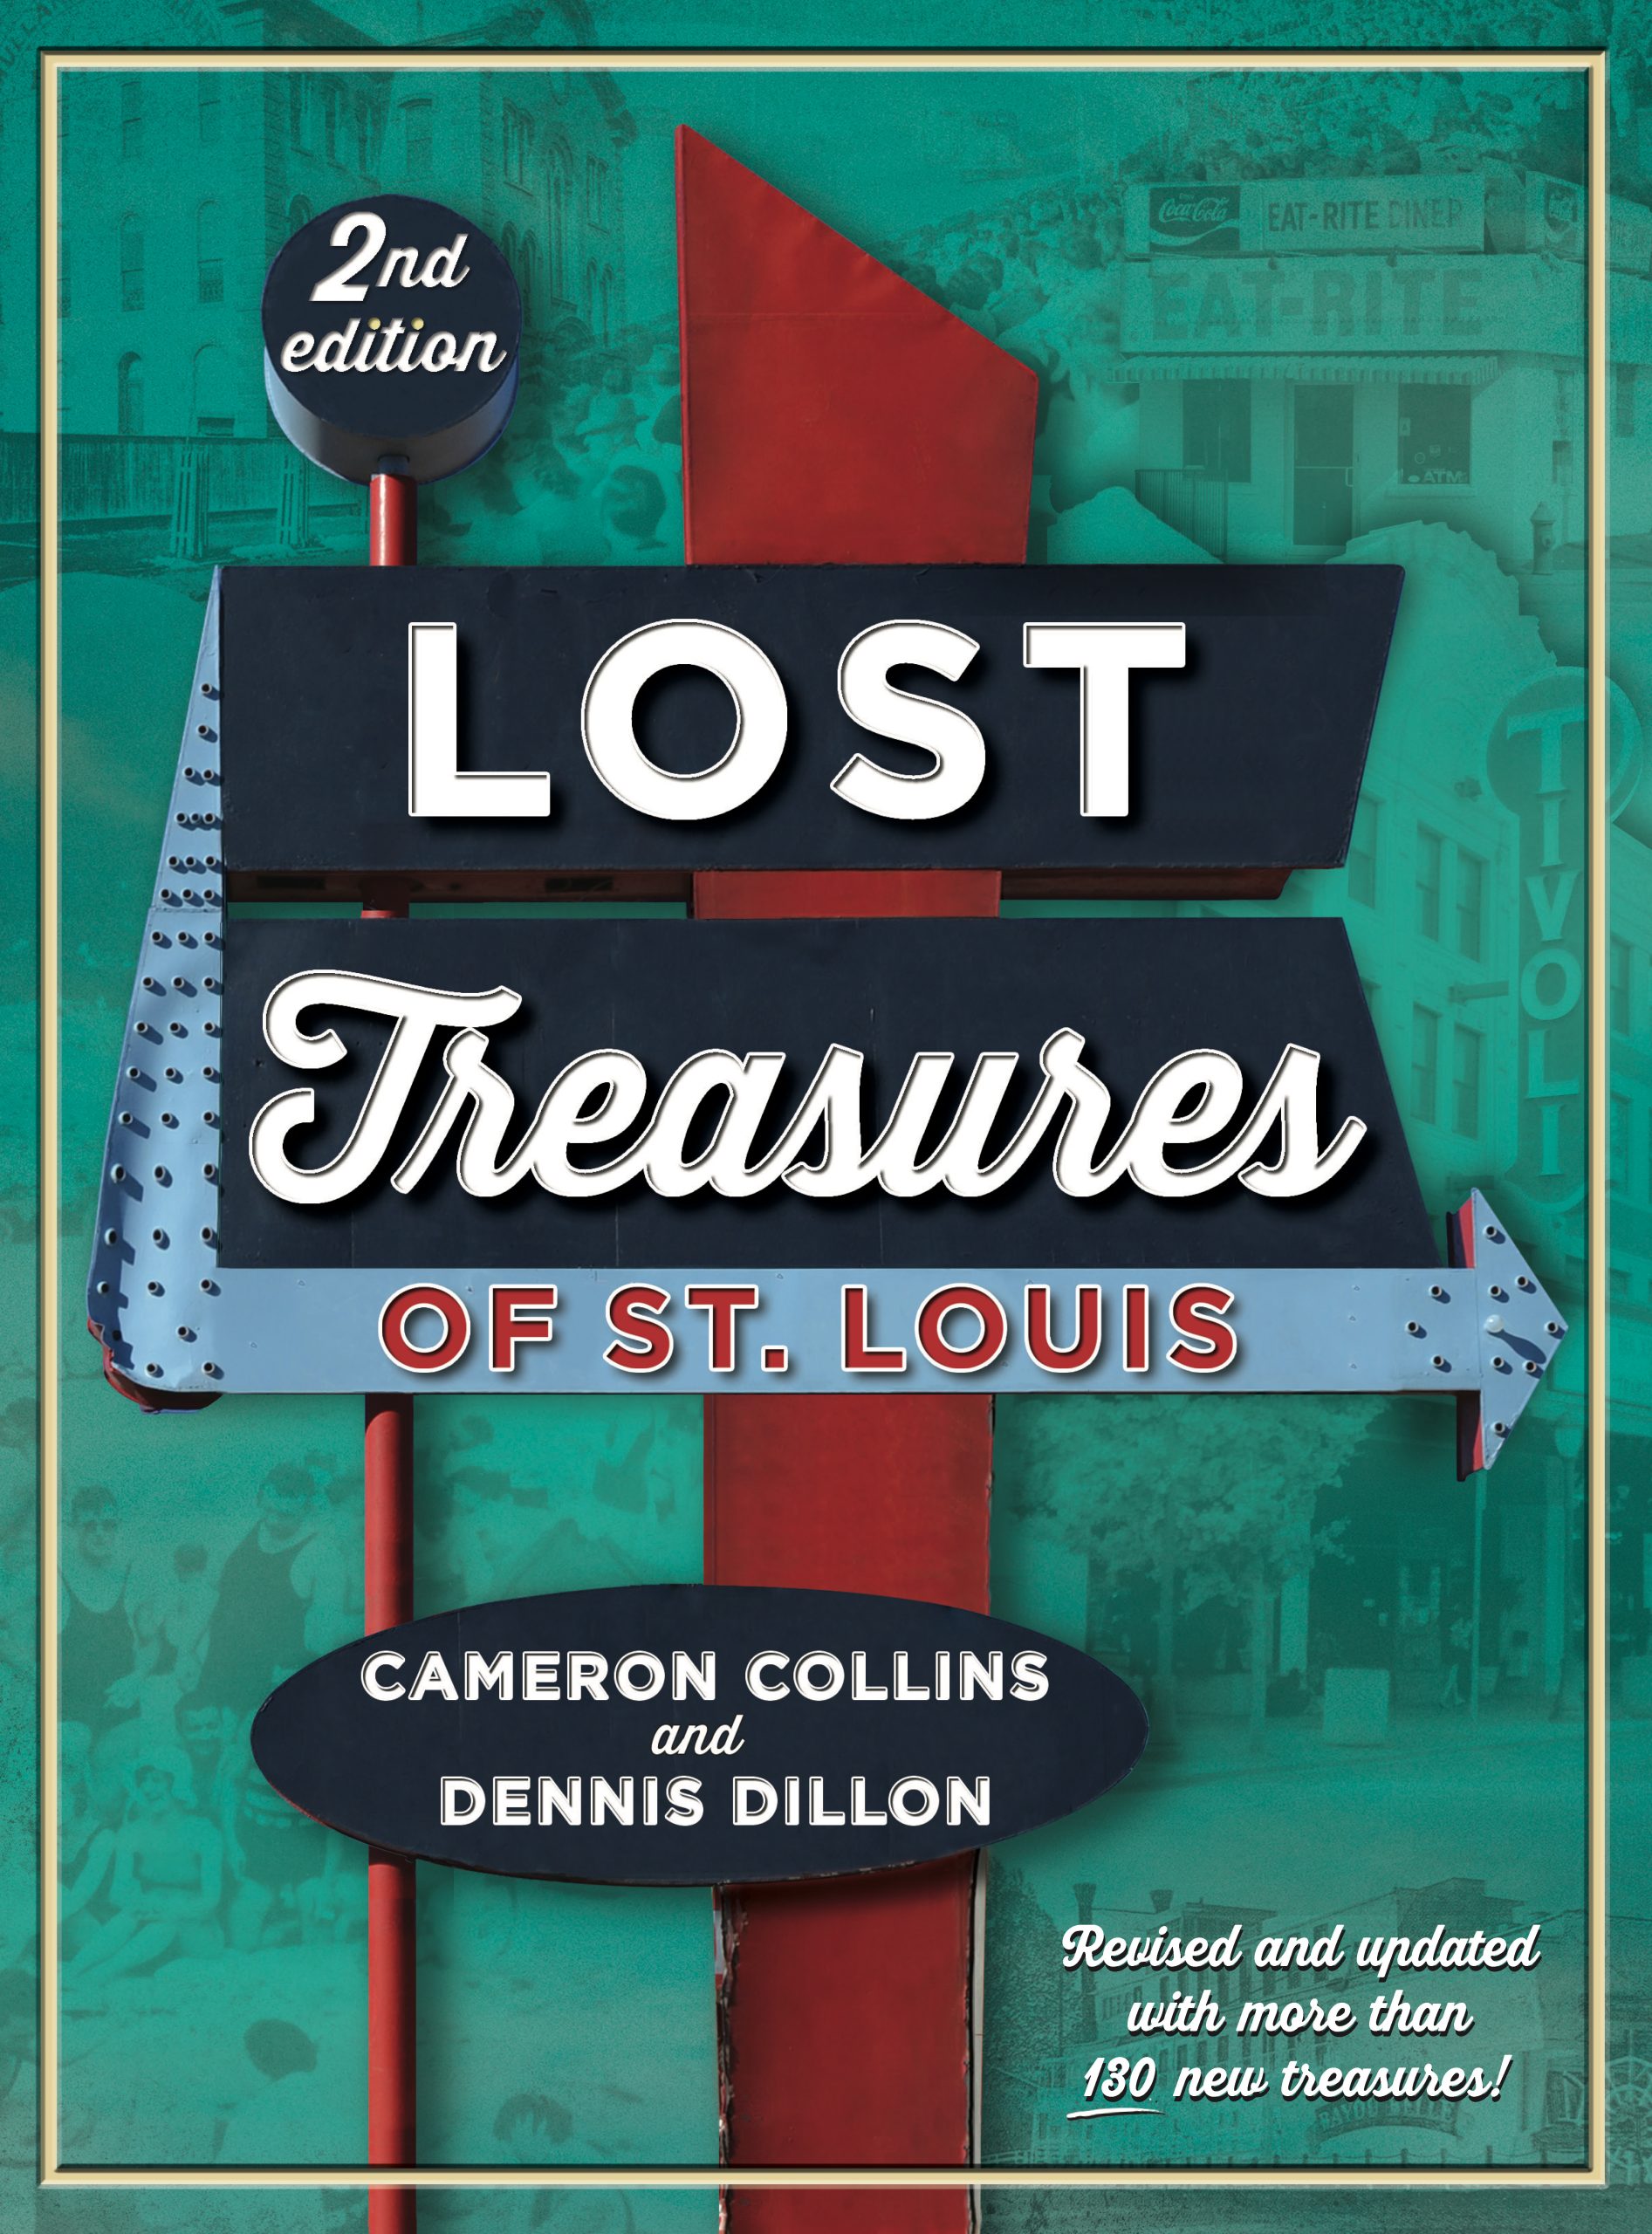 Lost Treasures of St. Louis, 2nd Edition